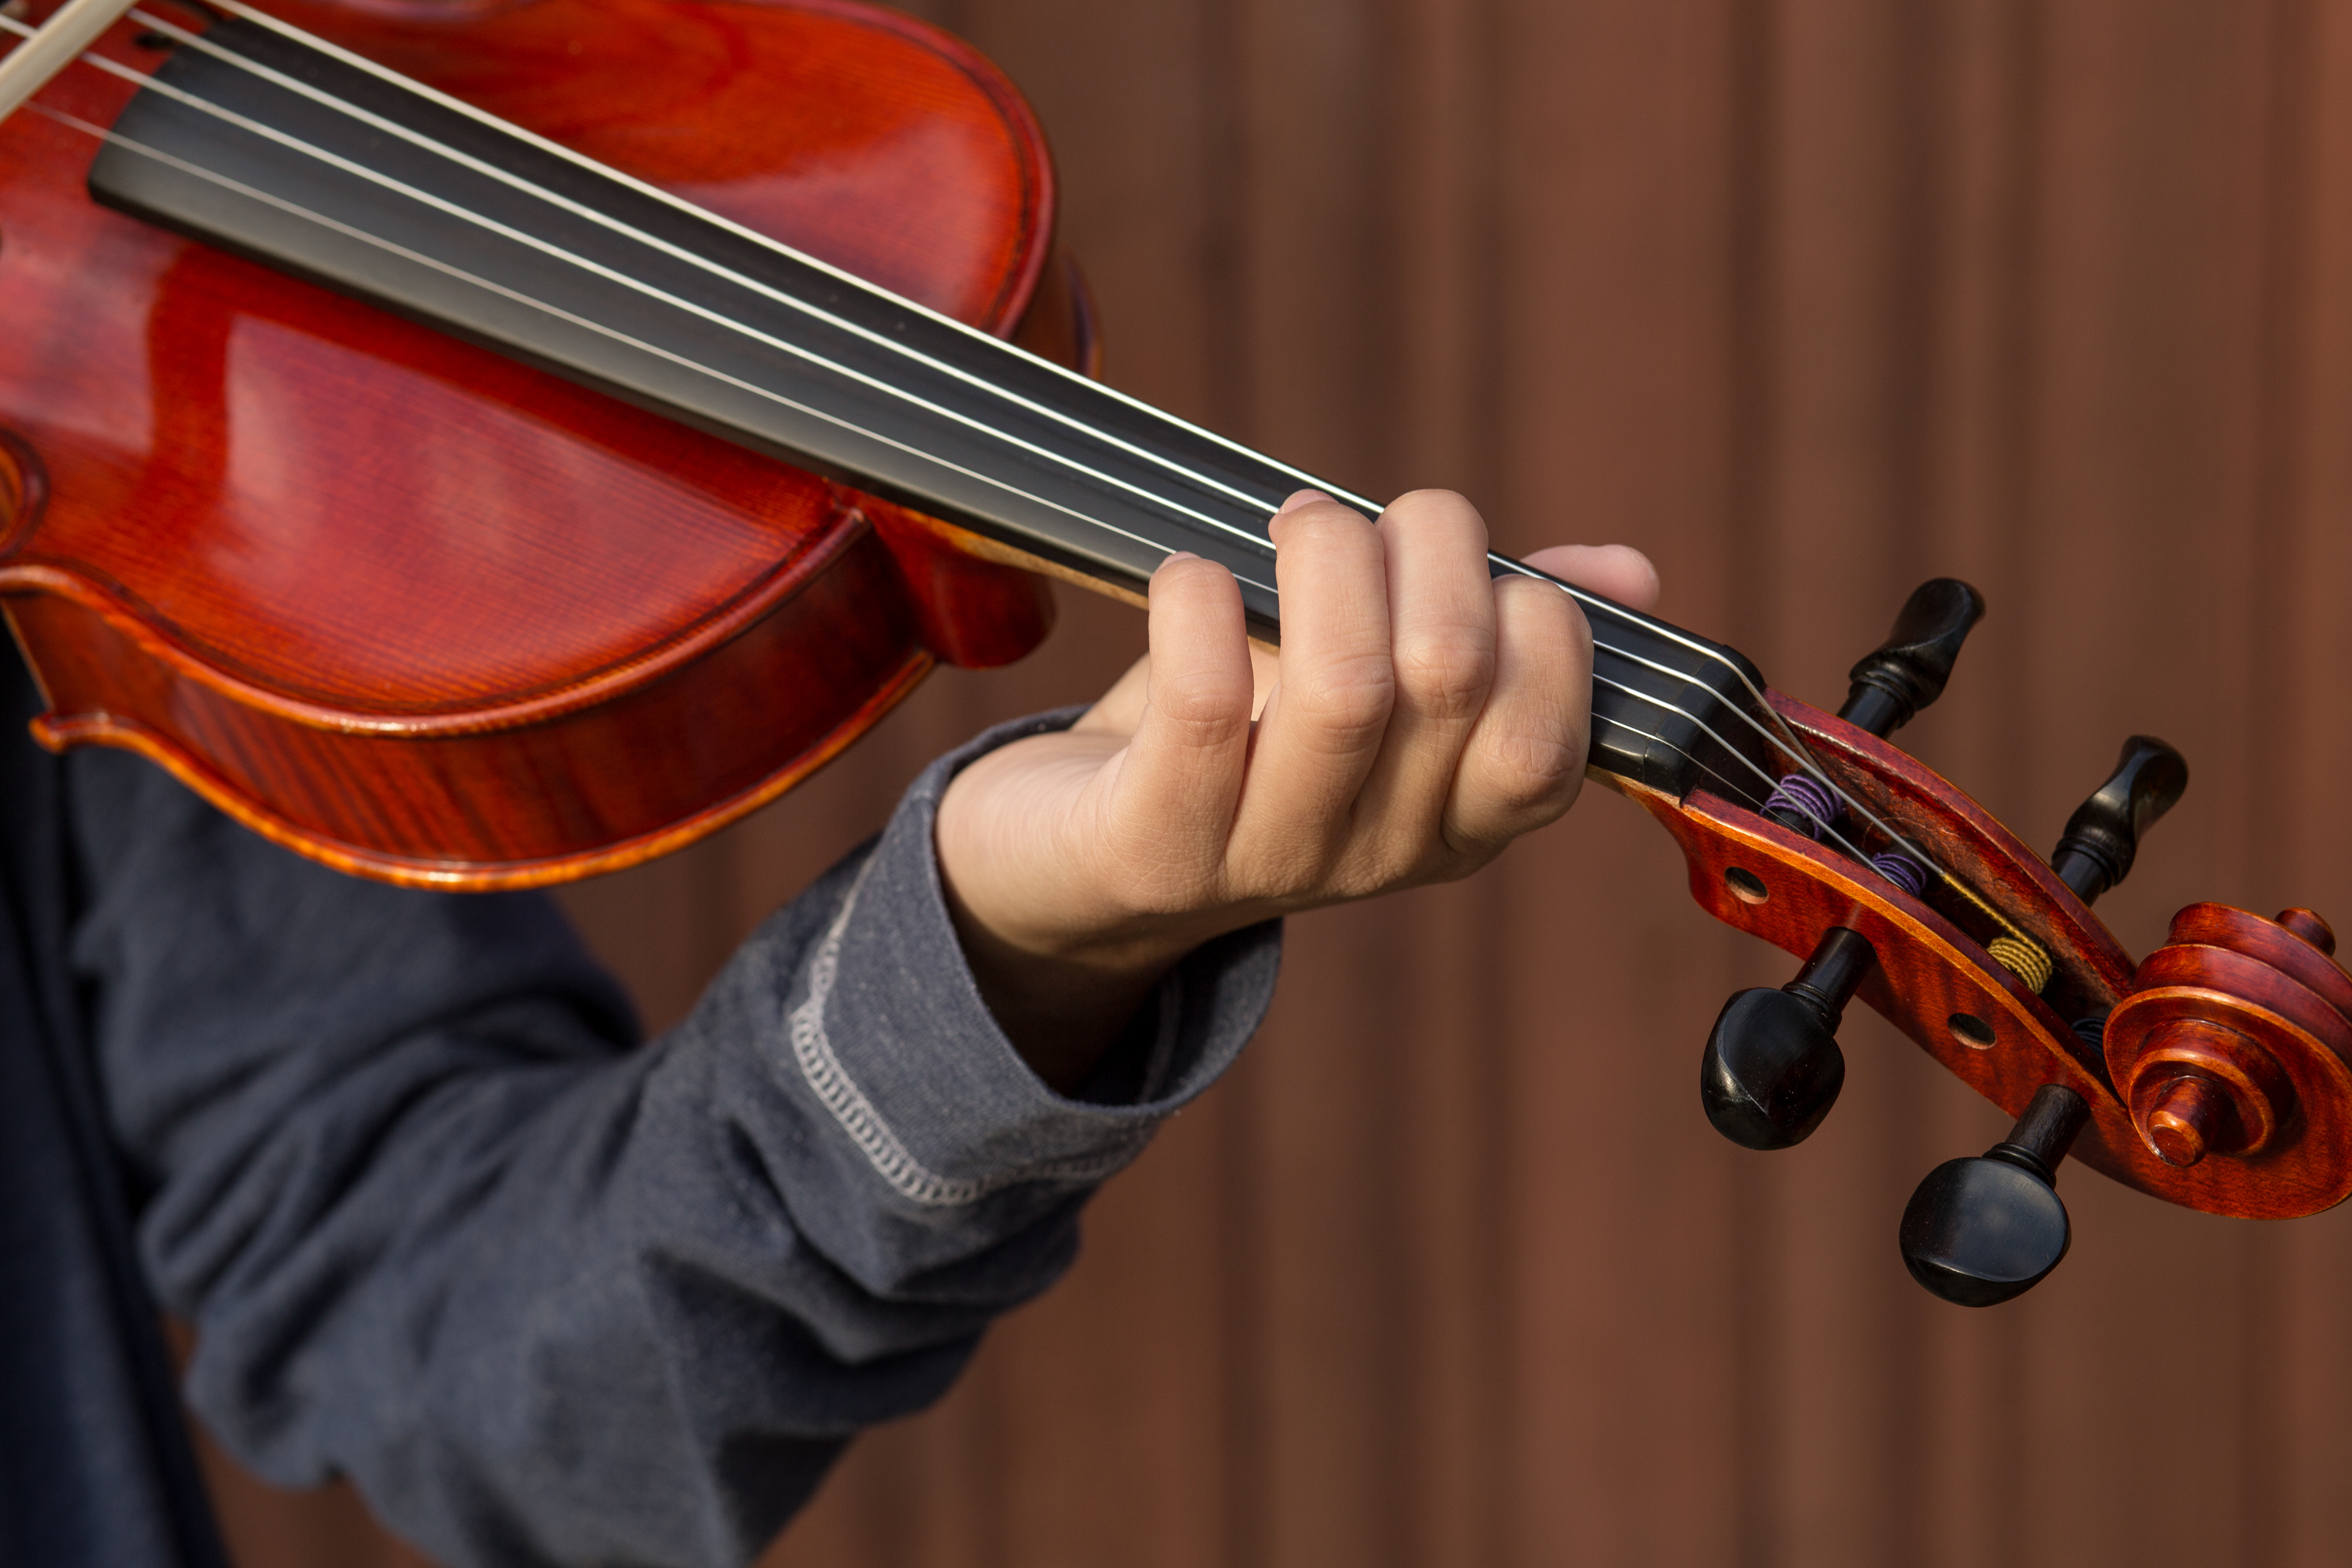 How to Choose the Right Violin Strings